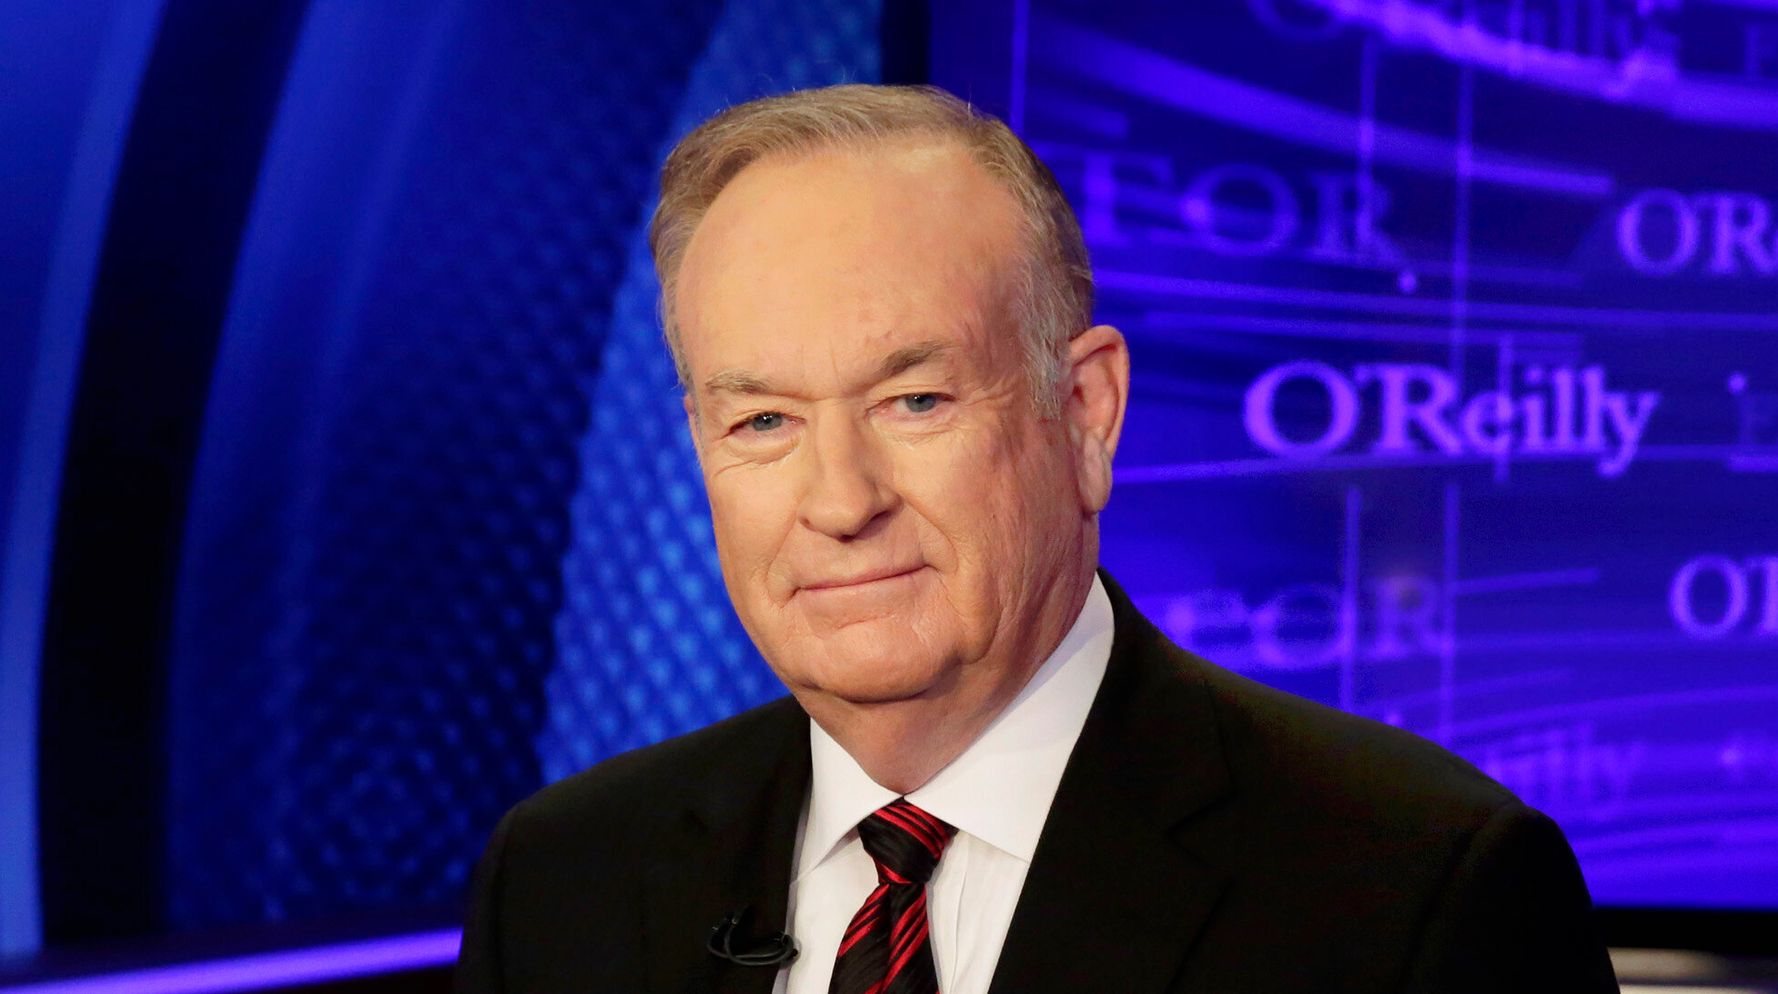 Bill O'Reilly Files Order To Keep Accuser From Appearing On 'The View'